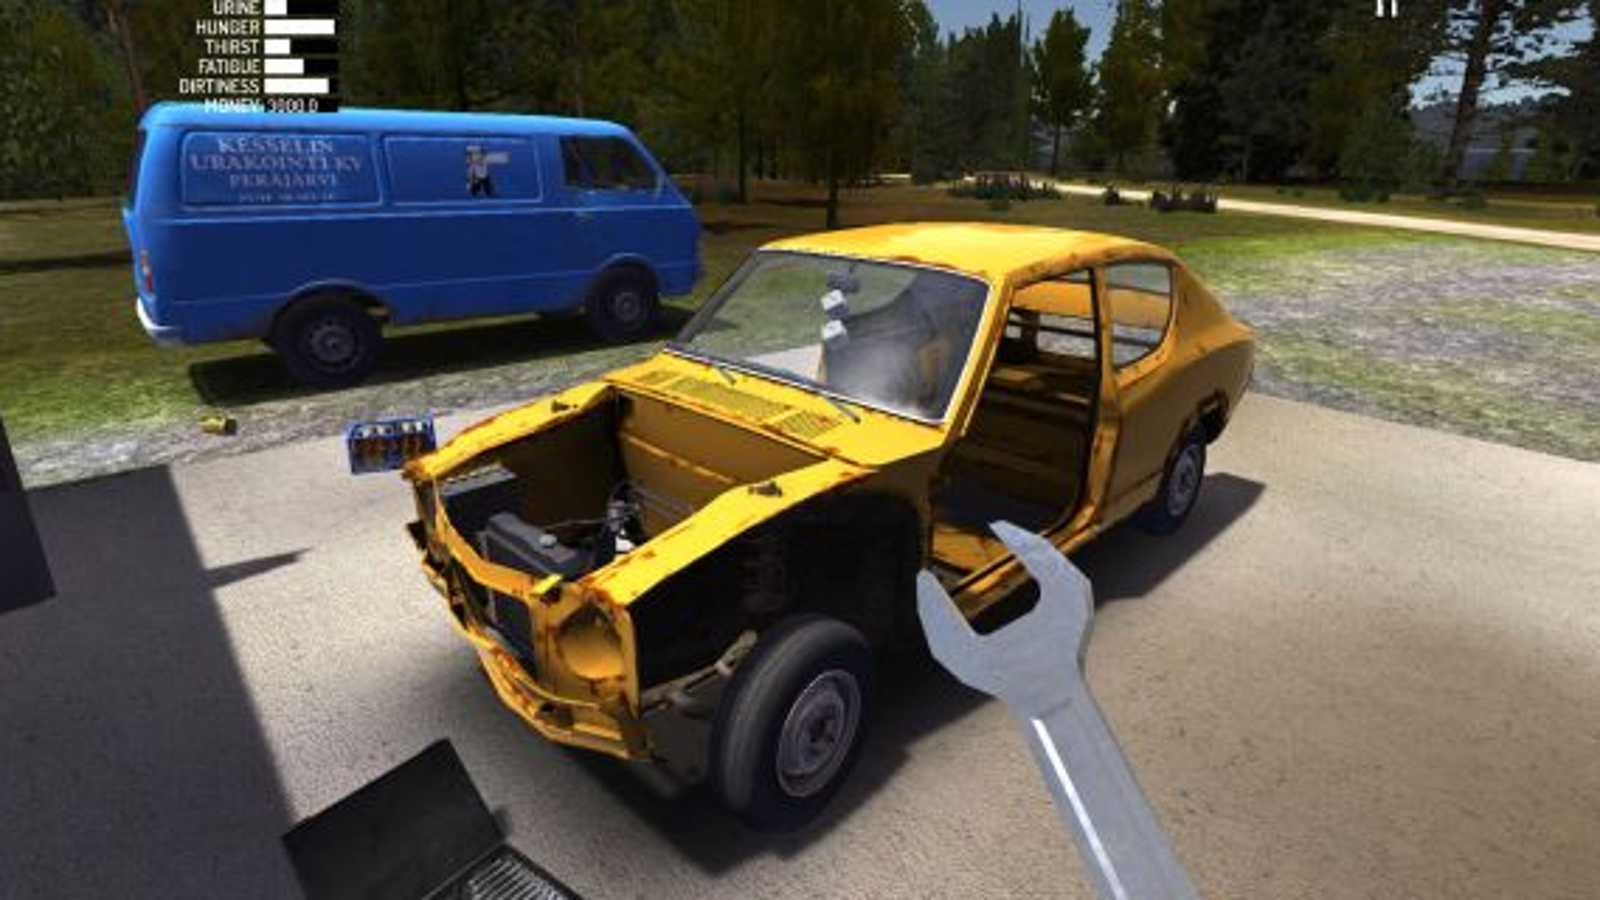 My Summer Car review (early access)